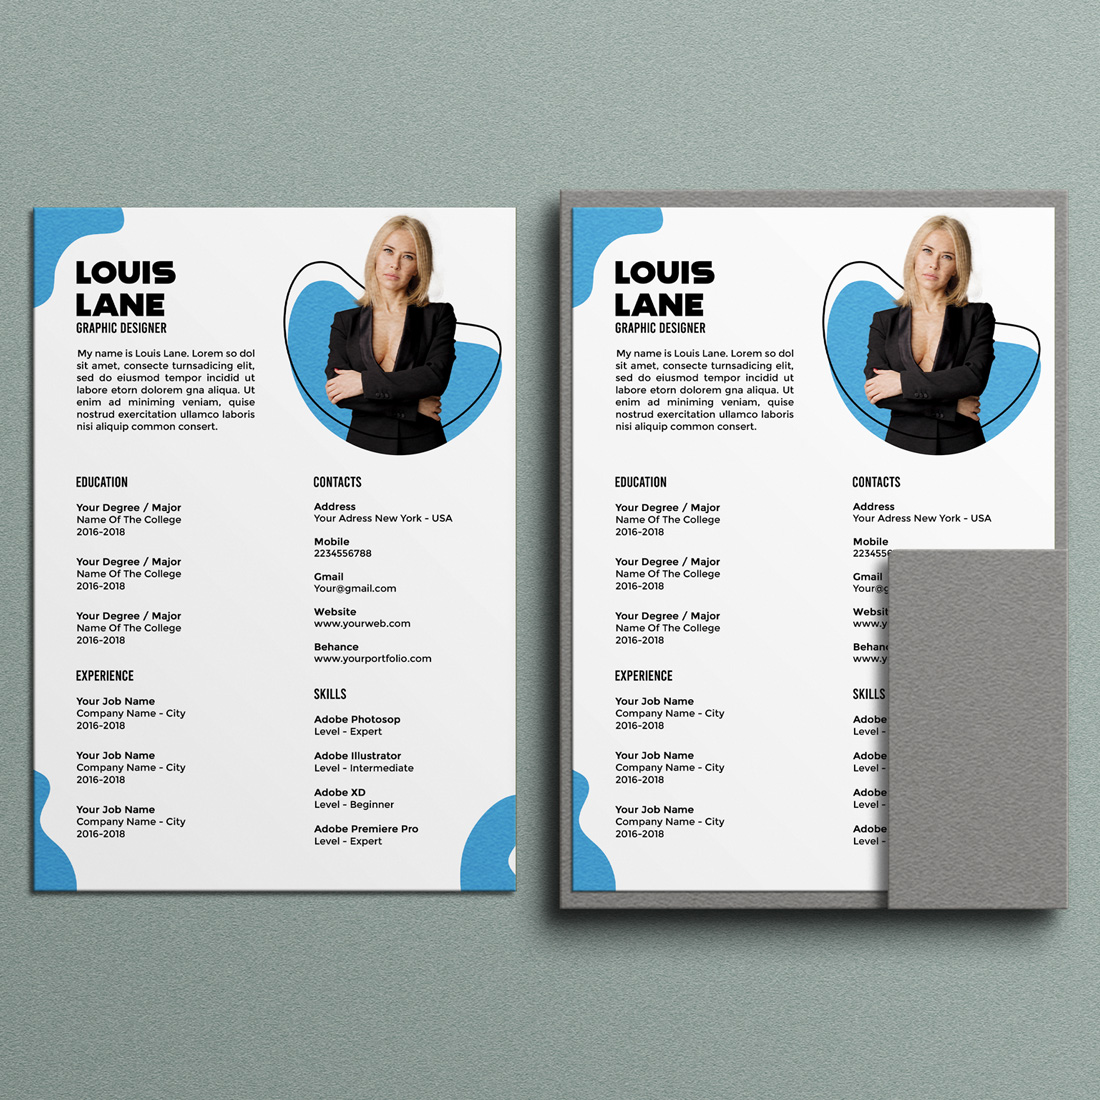 Set of two professional resumes with a blue background.